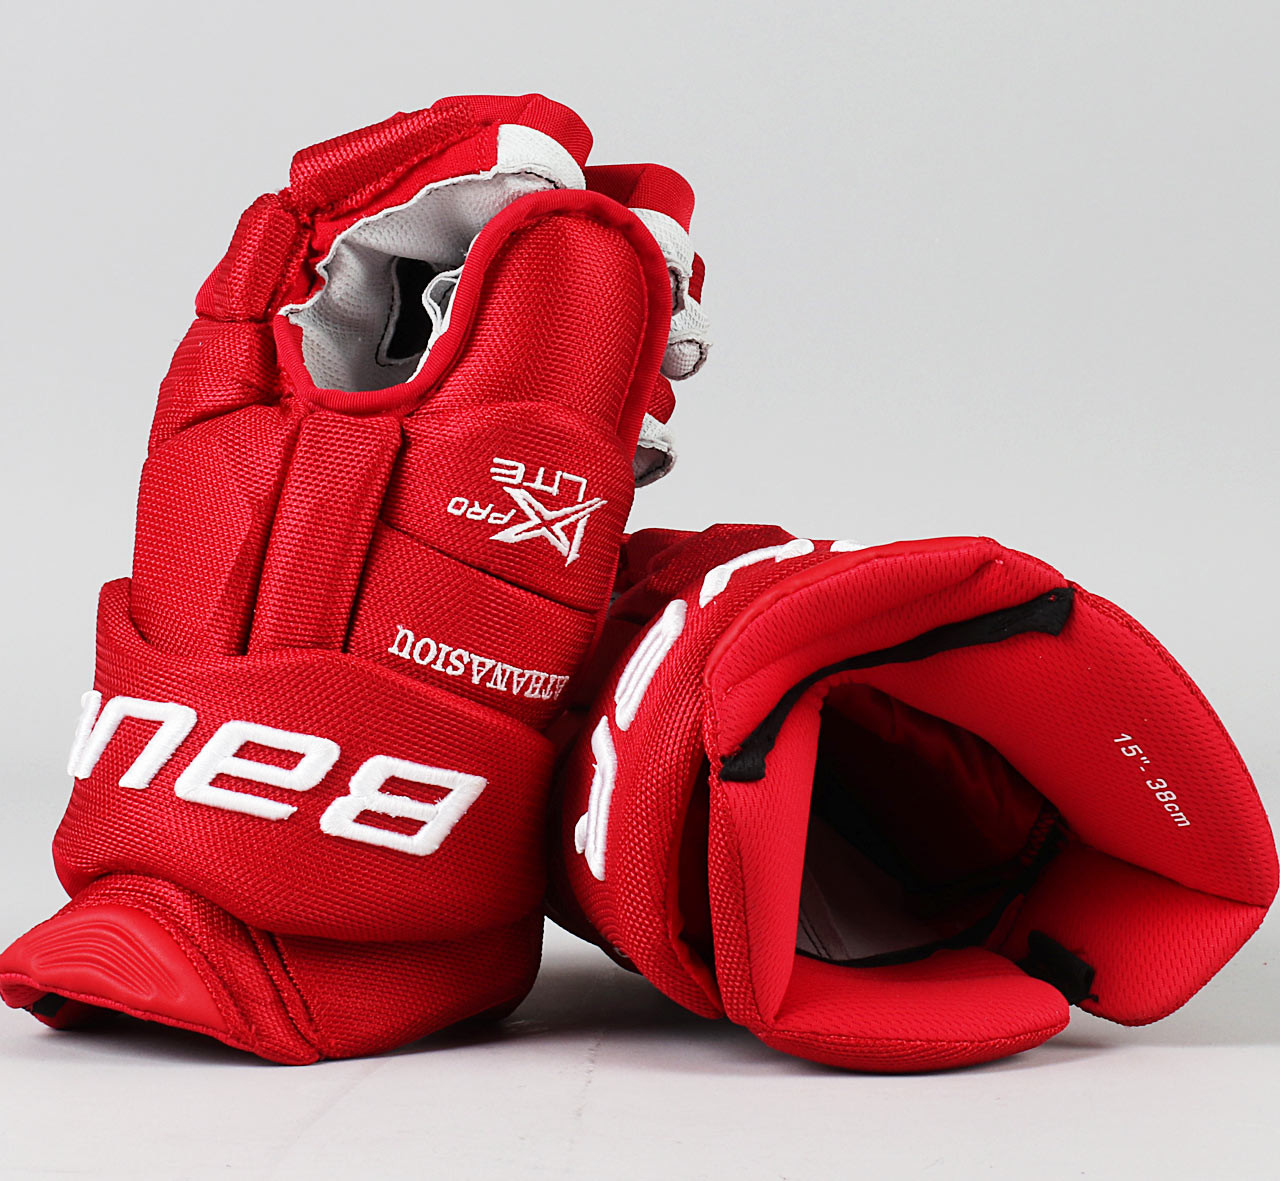 15" Bauer Vapor 1X Lite Pro Gloves - Andreas Athanasiou Detroit Red Wings -  Pro Stock Hockey